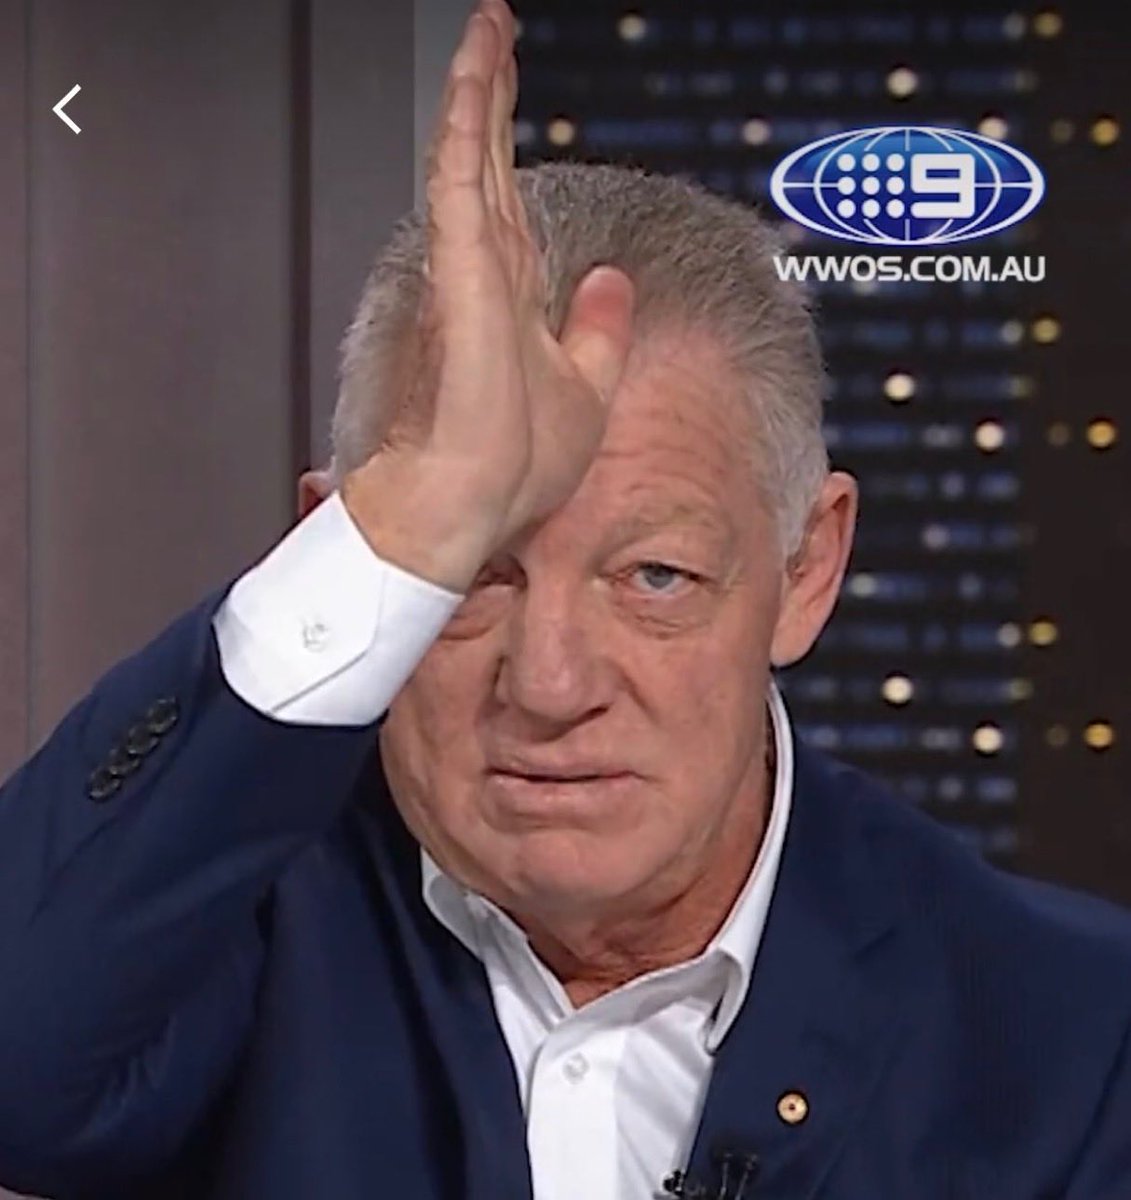 ⬛️⬜️🥷 YOUR NOTHING BUT A FRAUD GUS‼️ #NRLBulldogs. 

You would think Gus #askgus @NRLonNine @wwos would practice what he preached on how good certain teams are‼️

Take the knowledge back to your club if you know so much you idiot. #NRLRoostersPanthers 

Dead set LOSER.